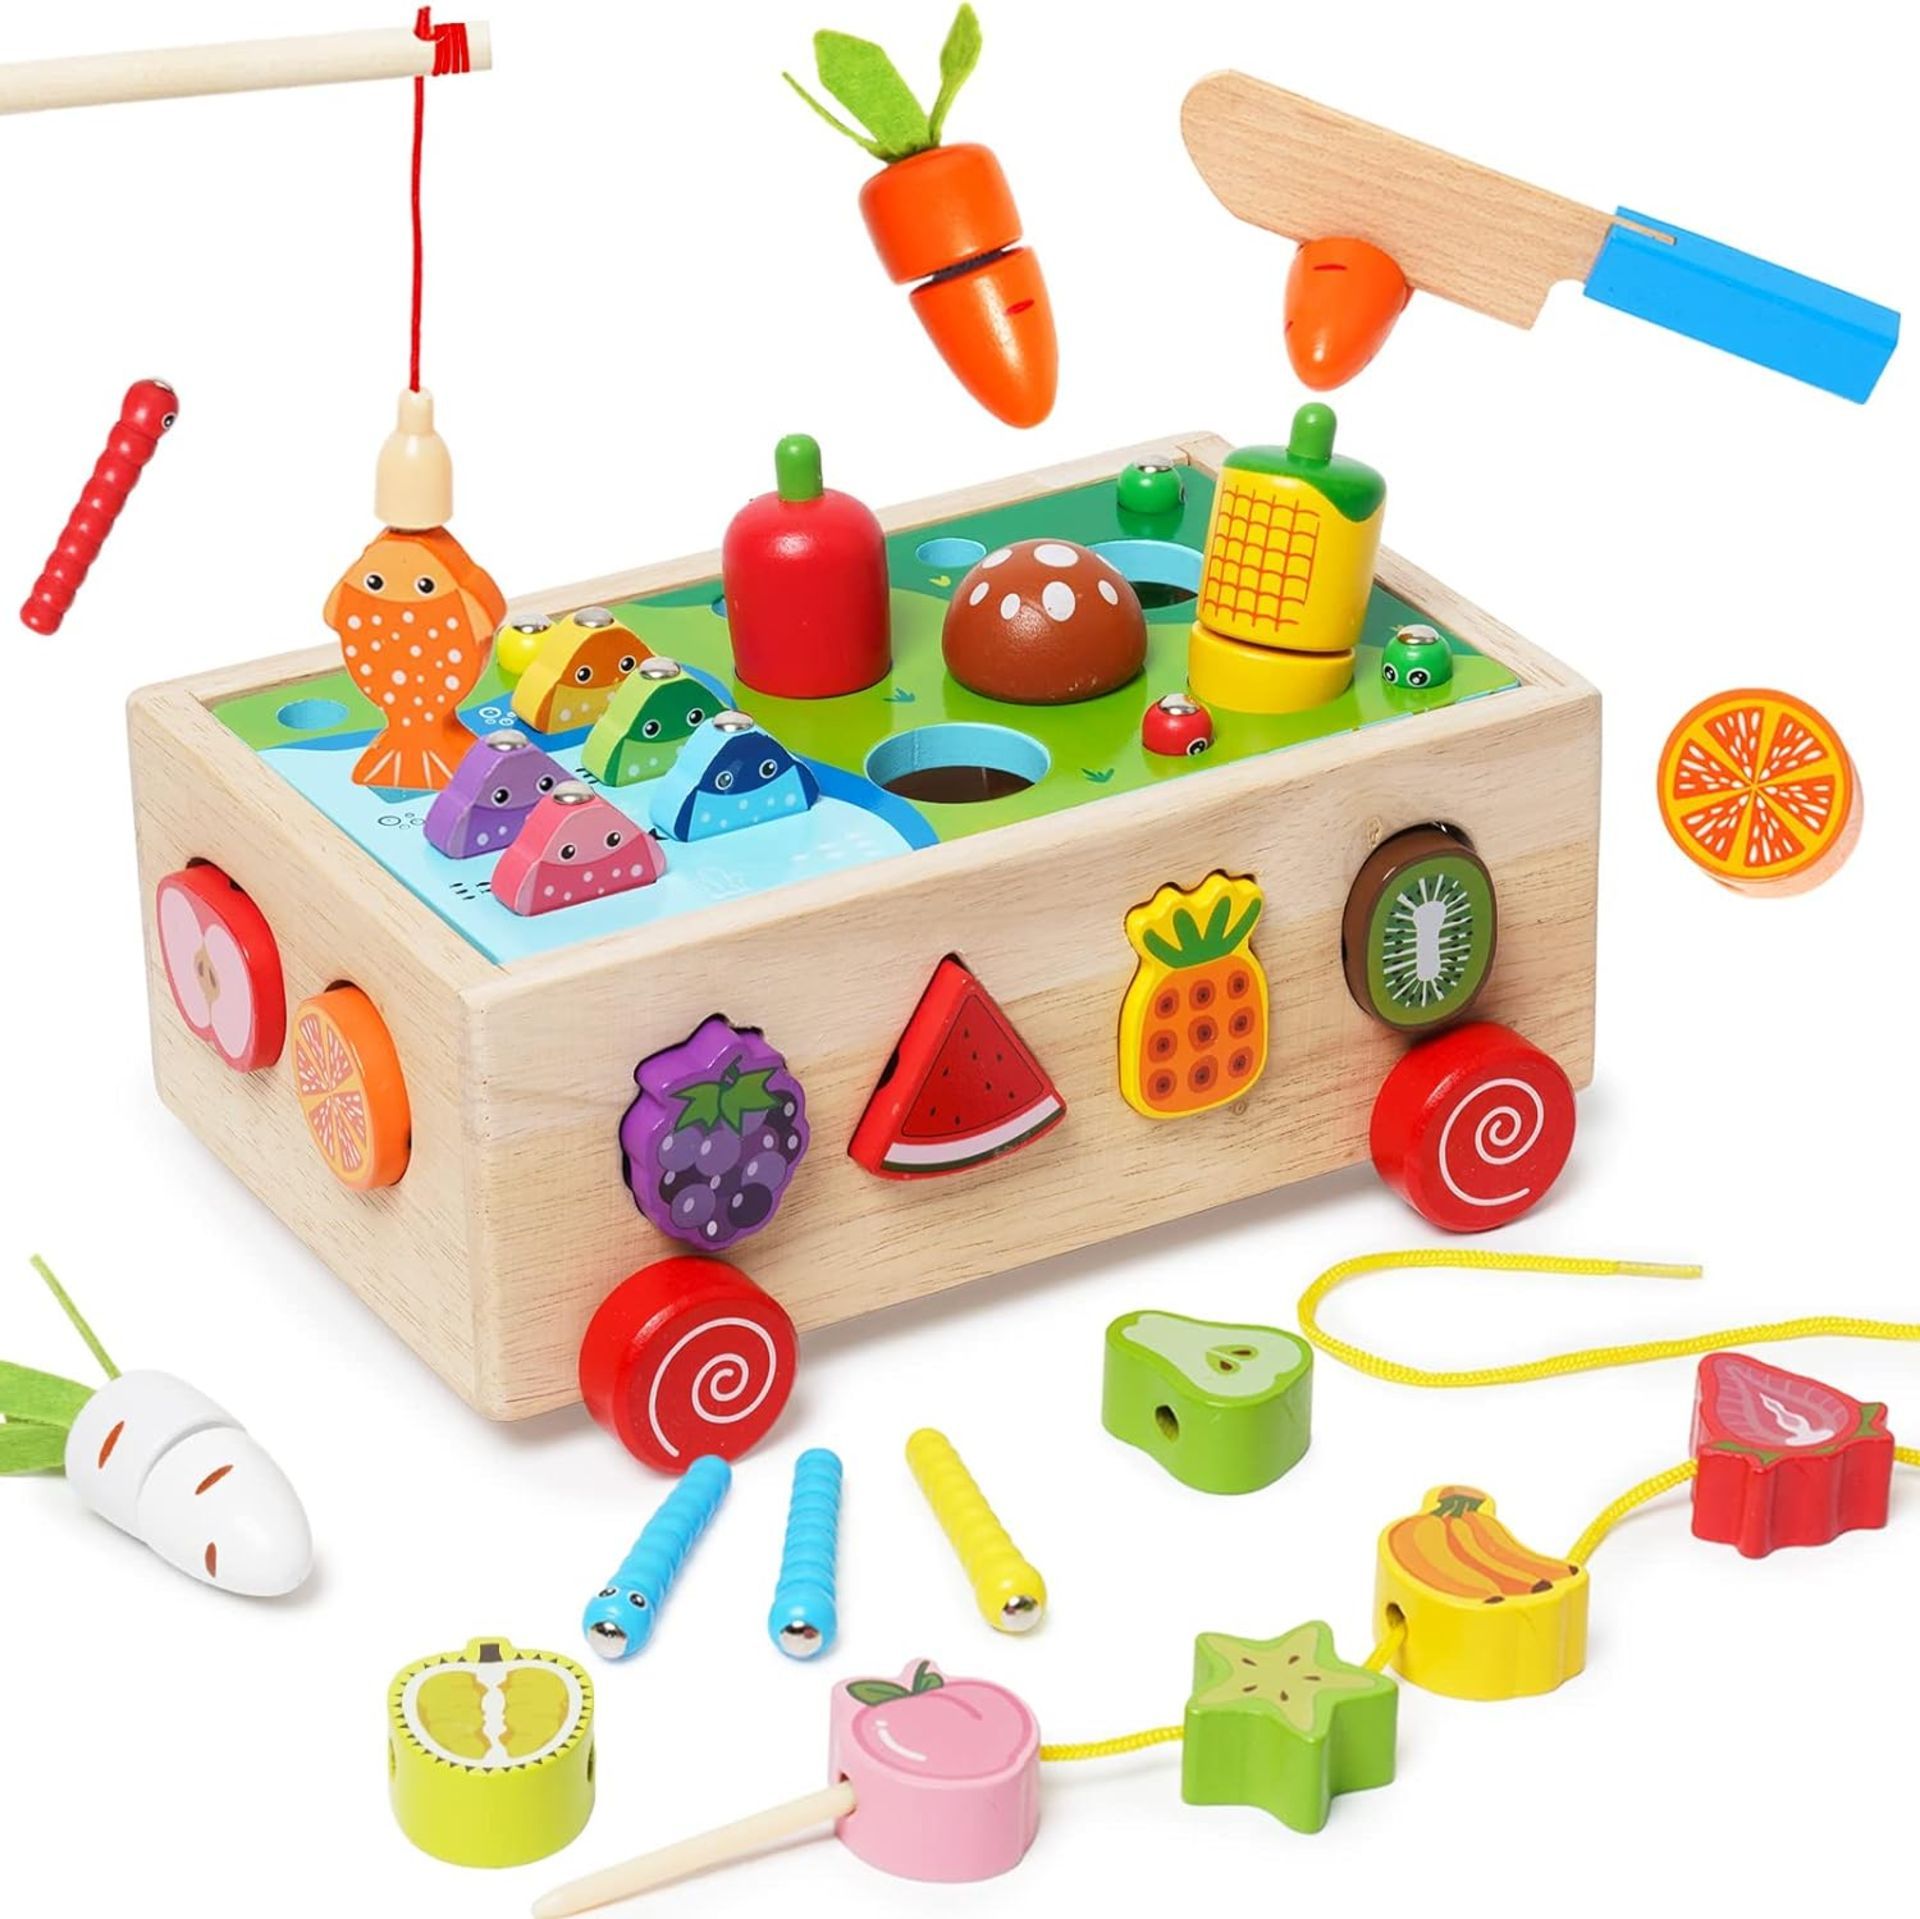 3 X BRAND NEW 7 IN 1 WOODEN TOY WITH CARROT HARVEST, MOTOR SKILLS TO, PLUG IN CUBE SORTING GAME